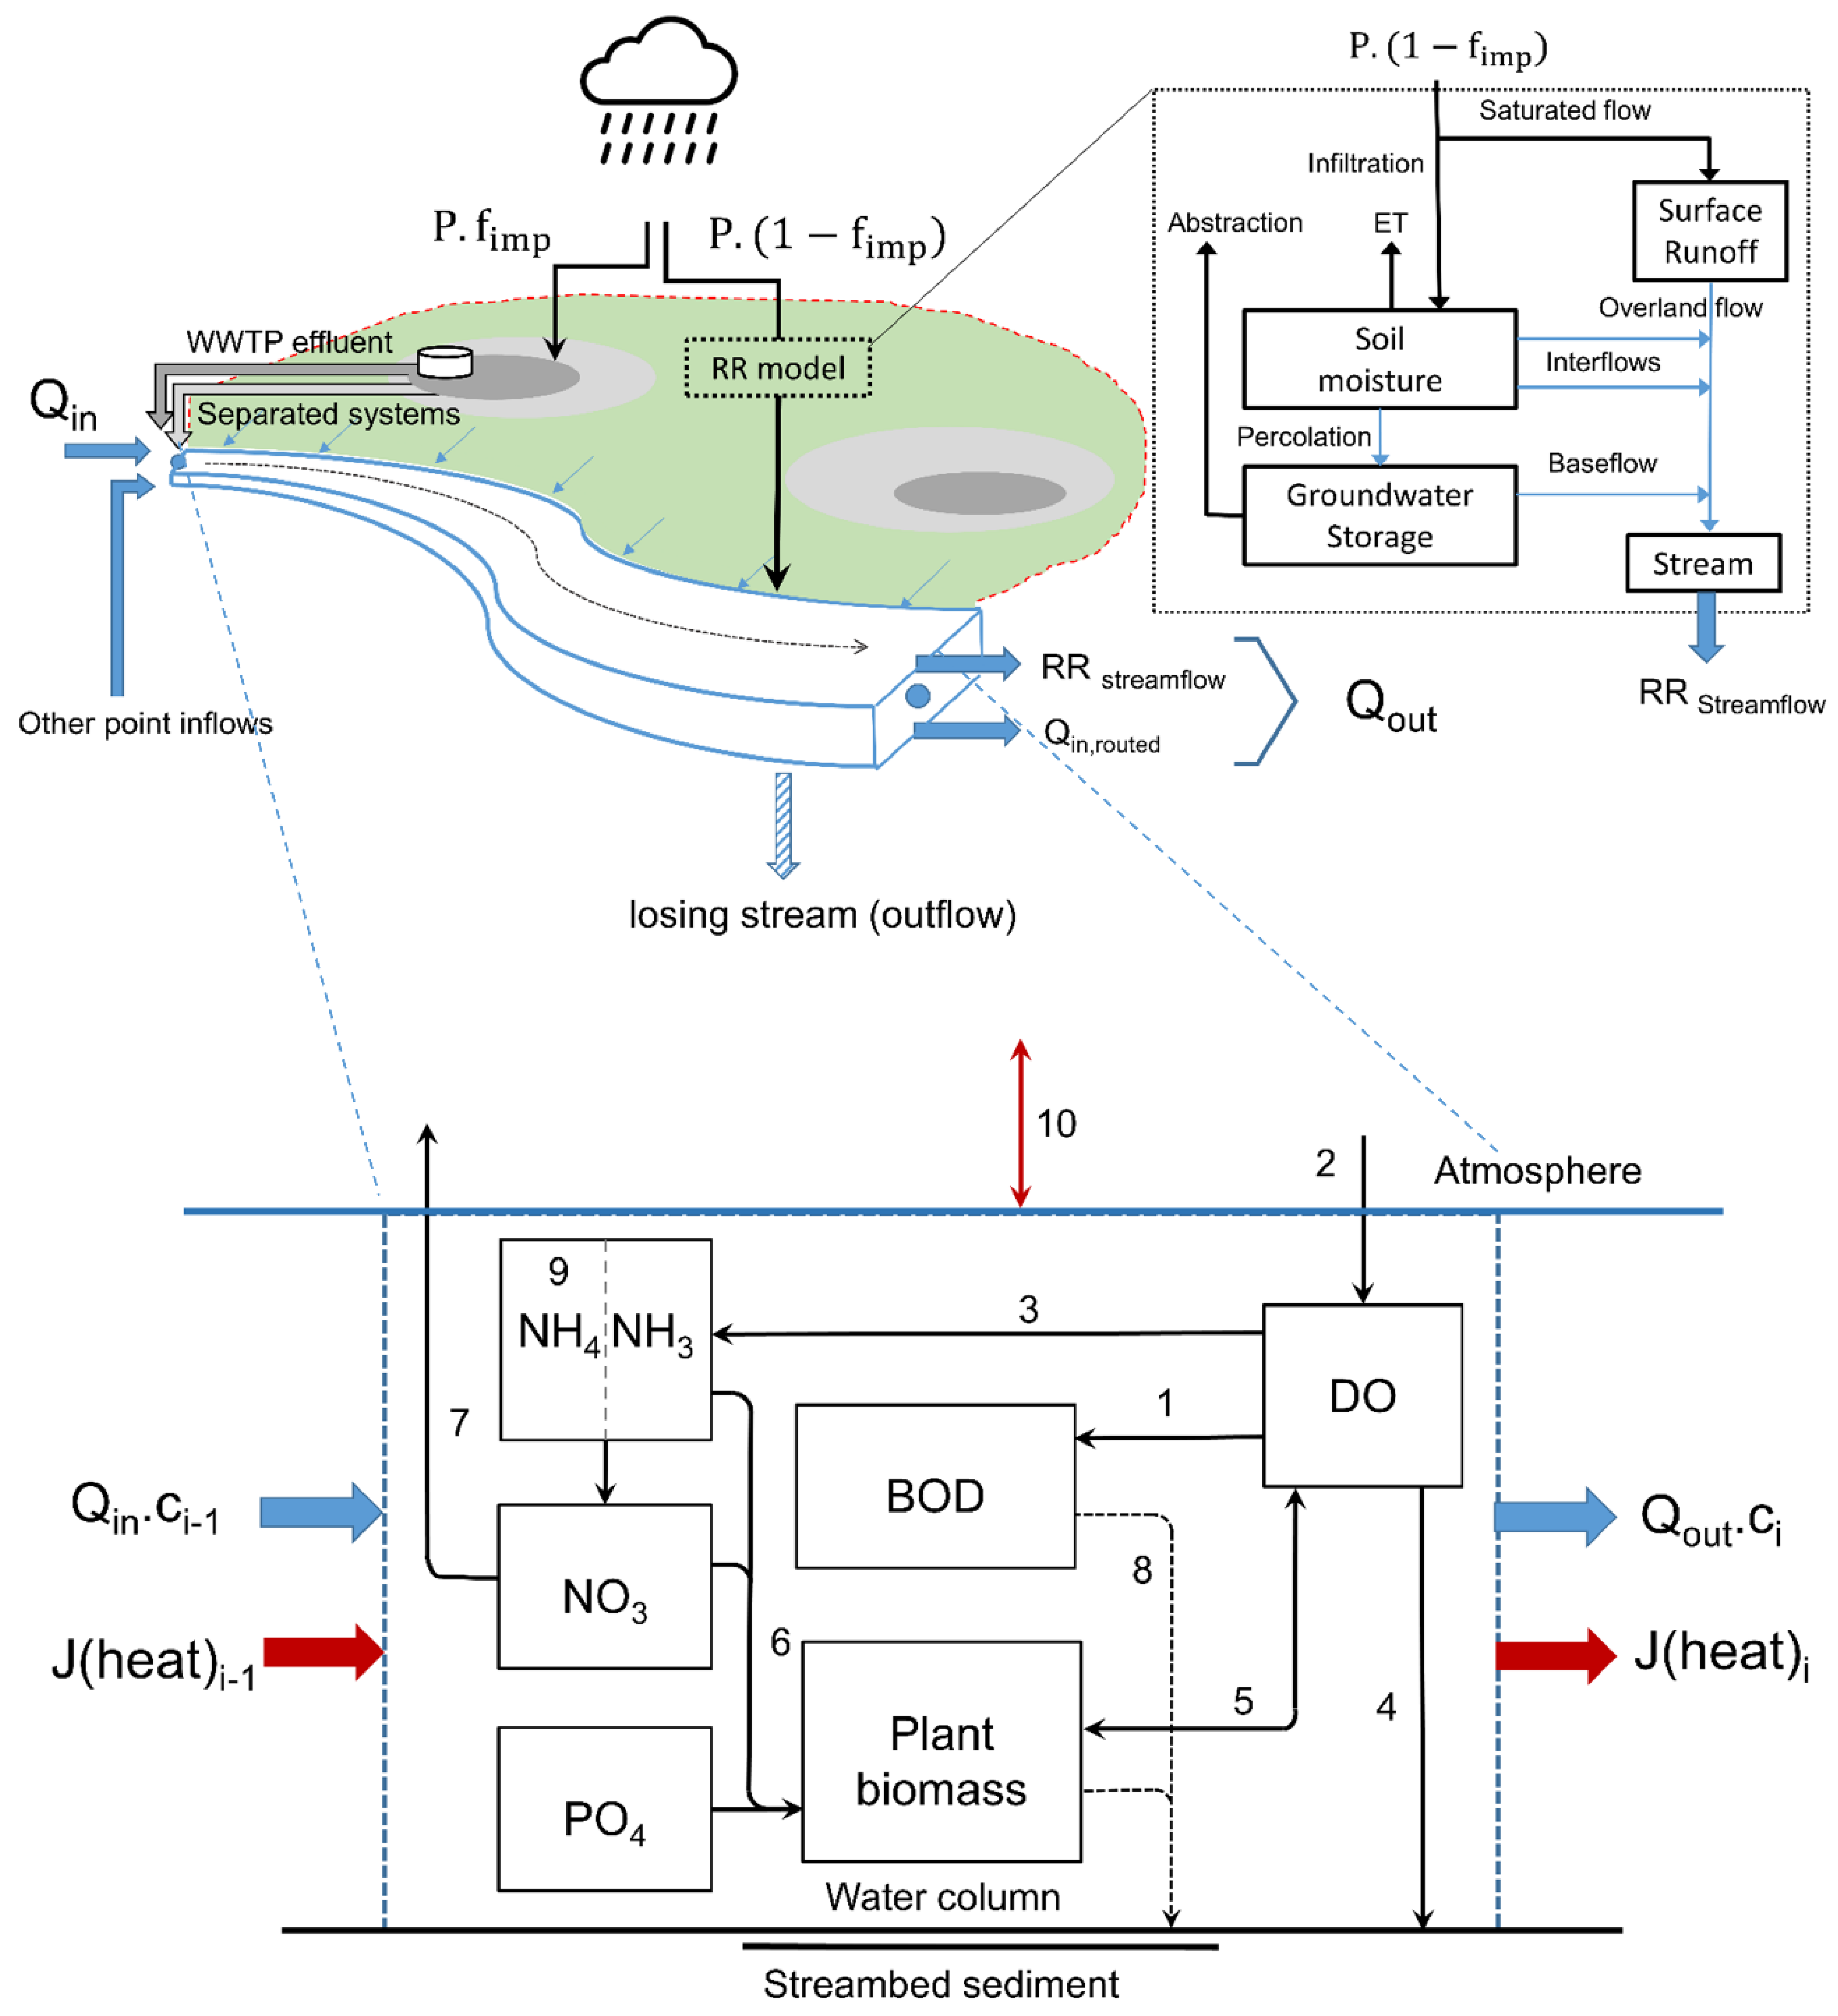 renhed Puno Ugyldigt Water | Free Full-Text | Data-Driven System Dynamics Model for Simulating  Water Quantity and Quality in Peri-Urban Streams | HTML